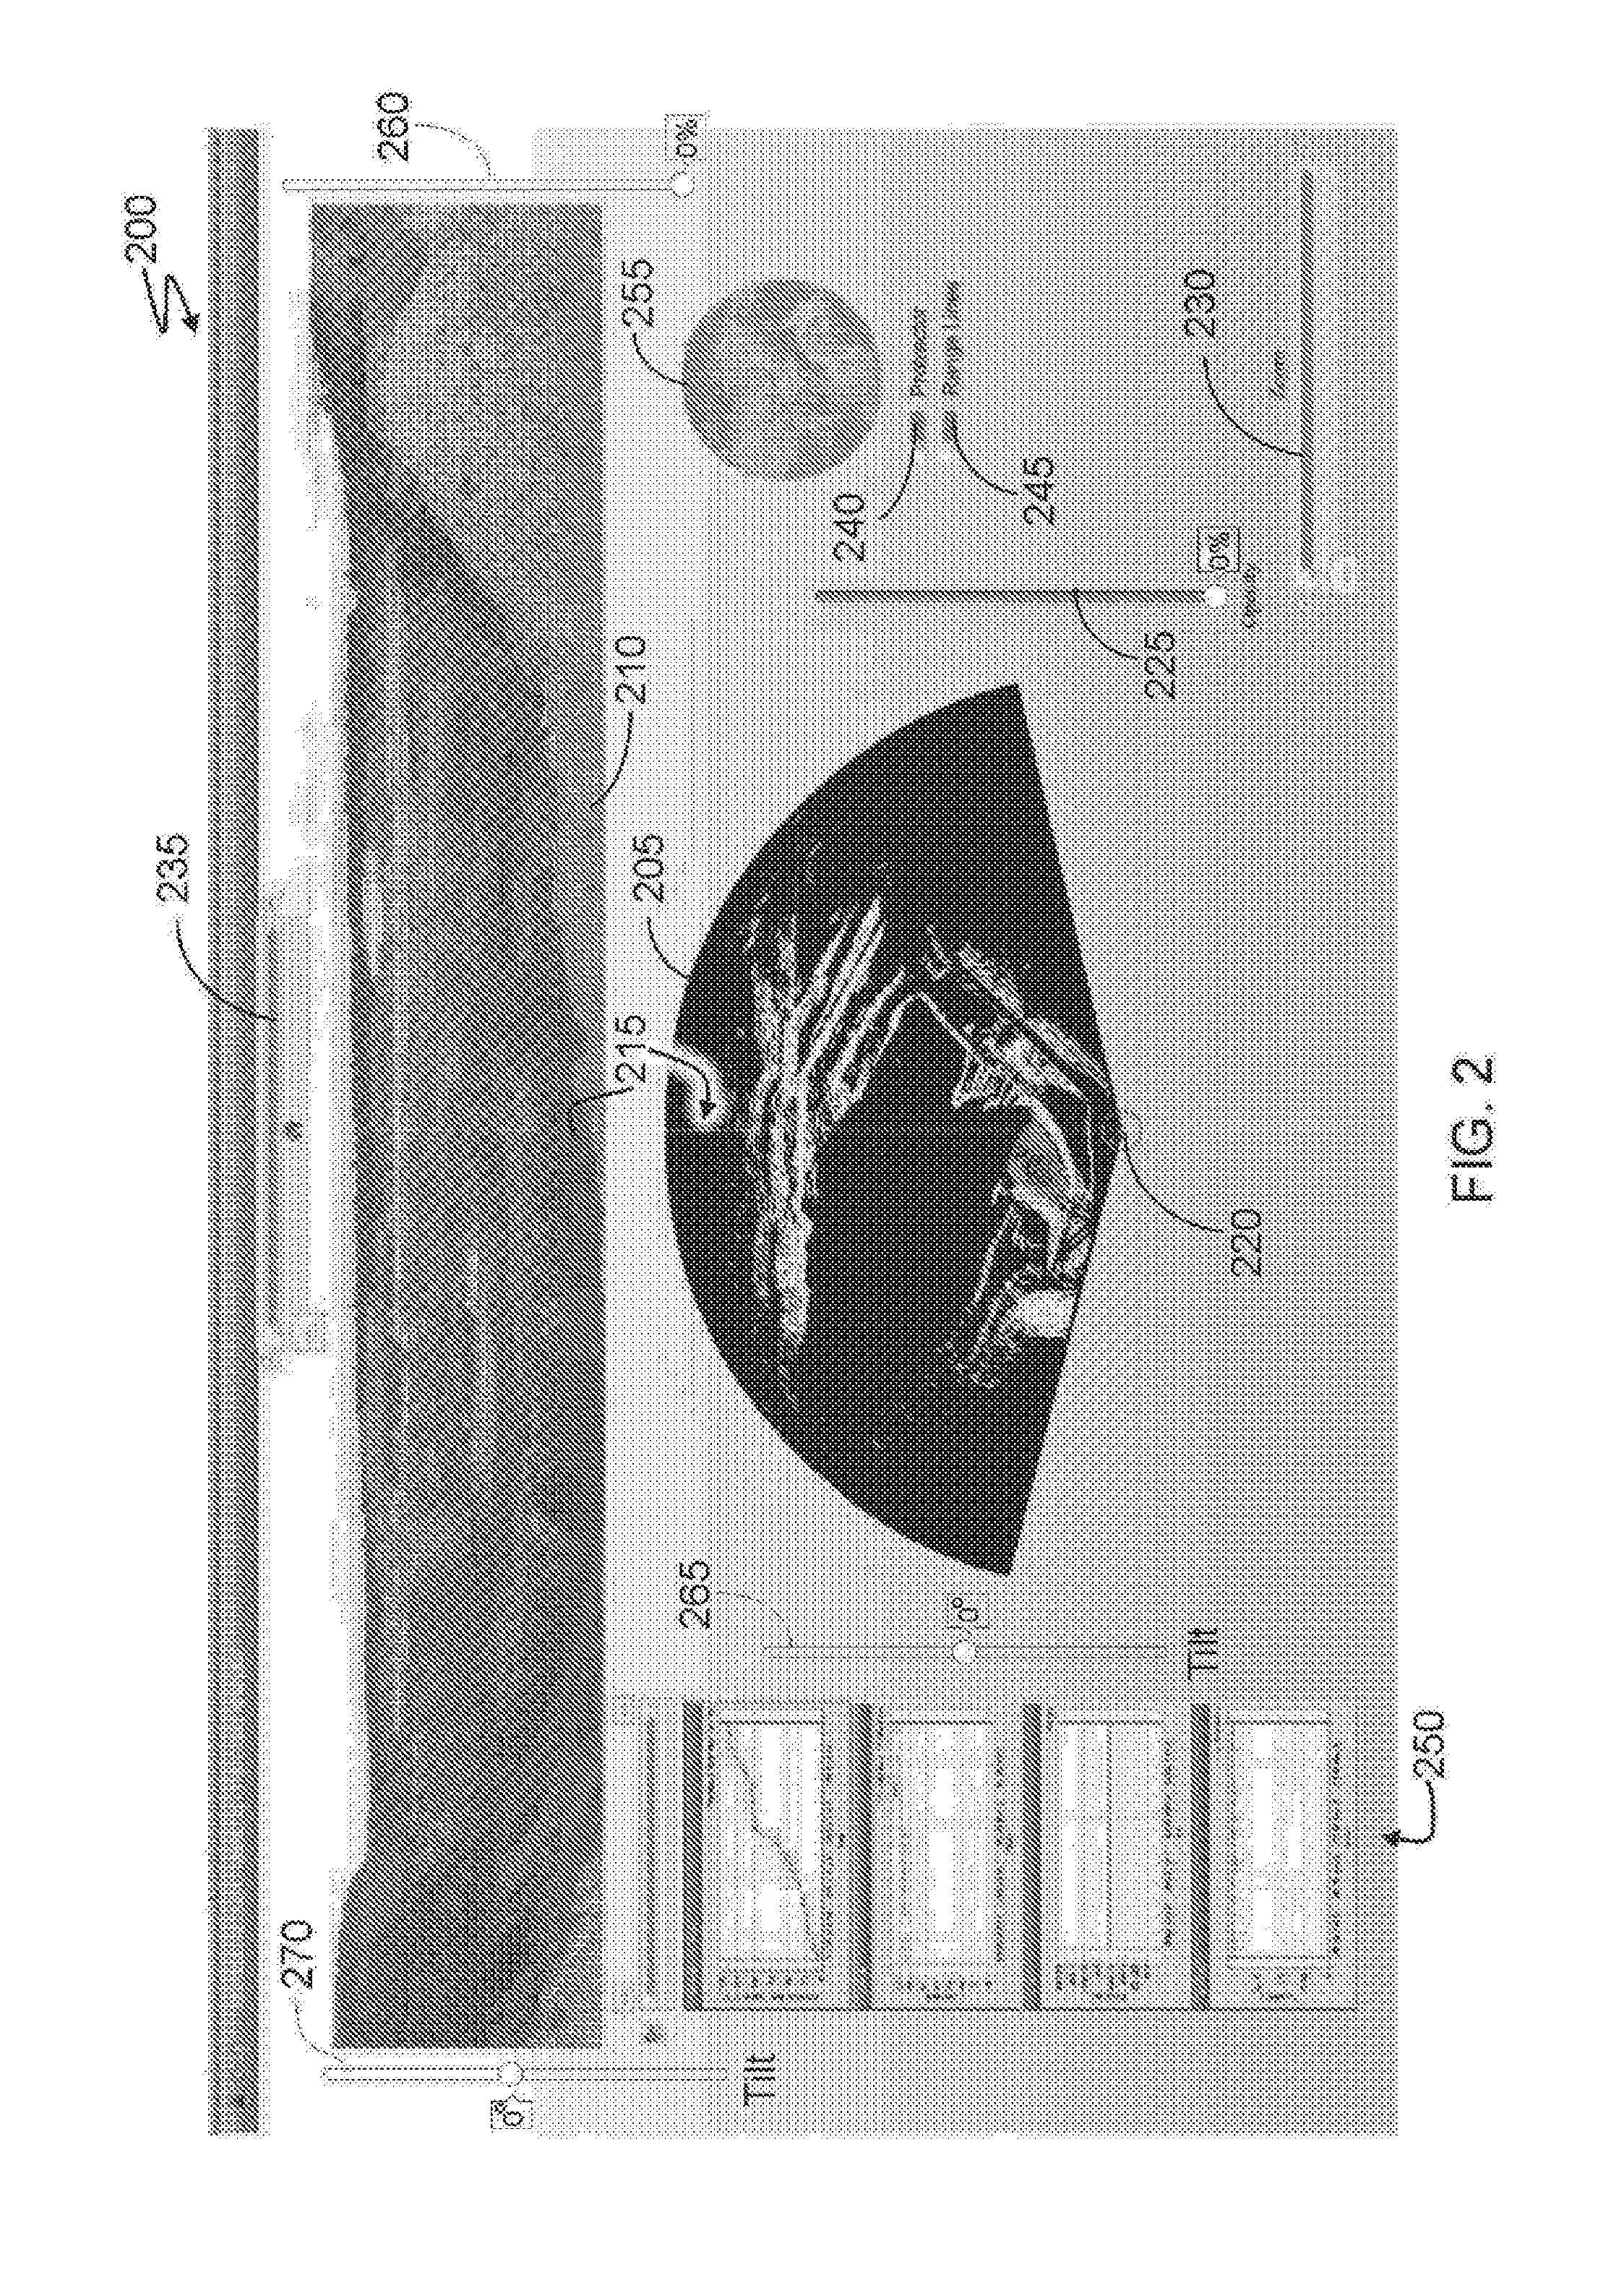 Method and system for displaying an area